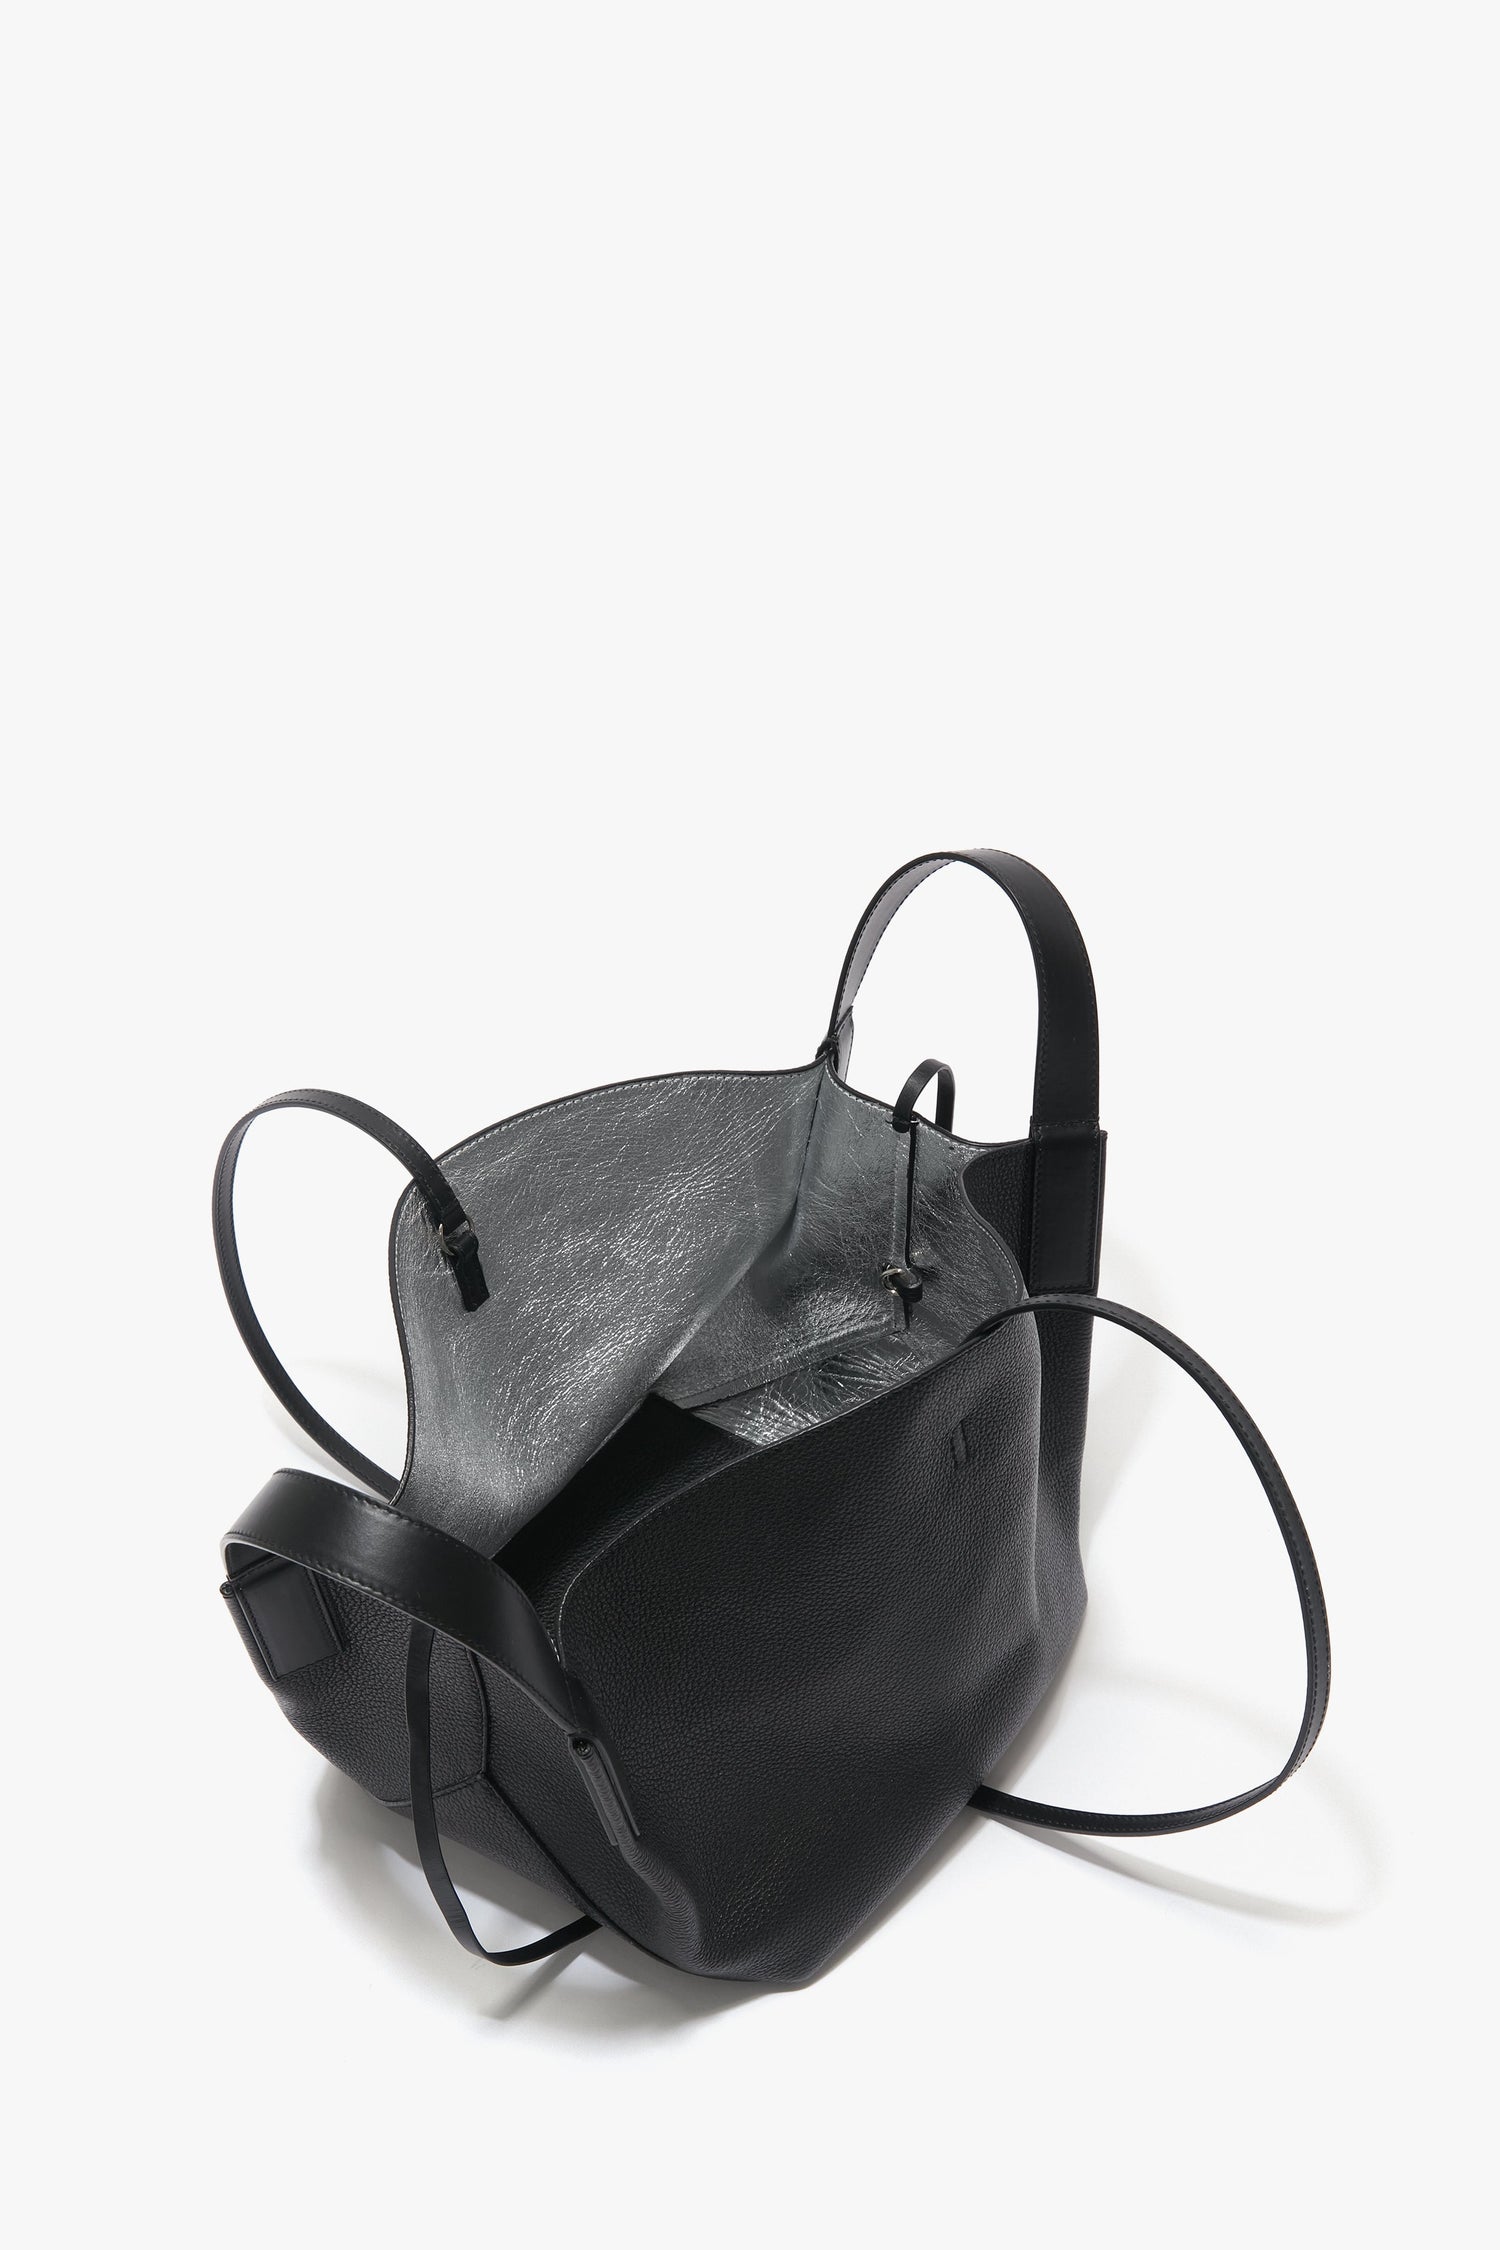 A black leather W11 Mini Tote Bag In Black Leather crafted from grainy calf leather by Victoria Beckham with an open top, revealing a gray interior and long, thin shoulder straps for a touch of luxurious sophistication.